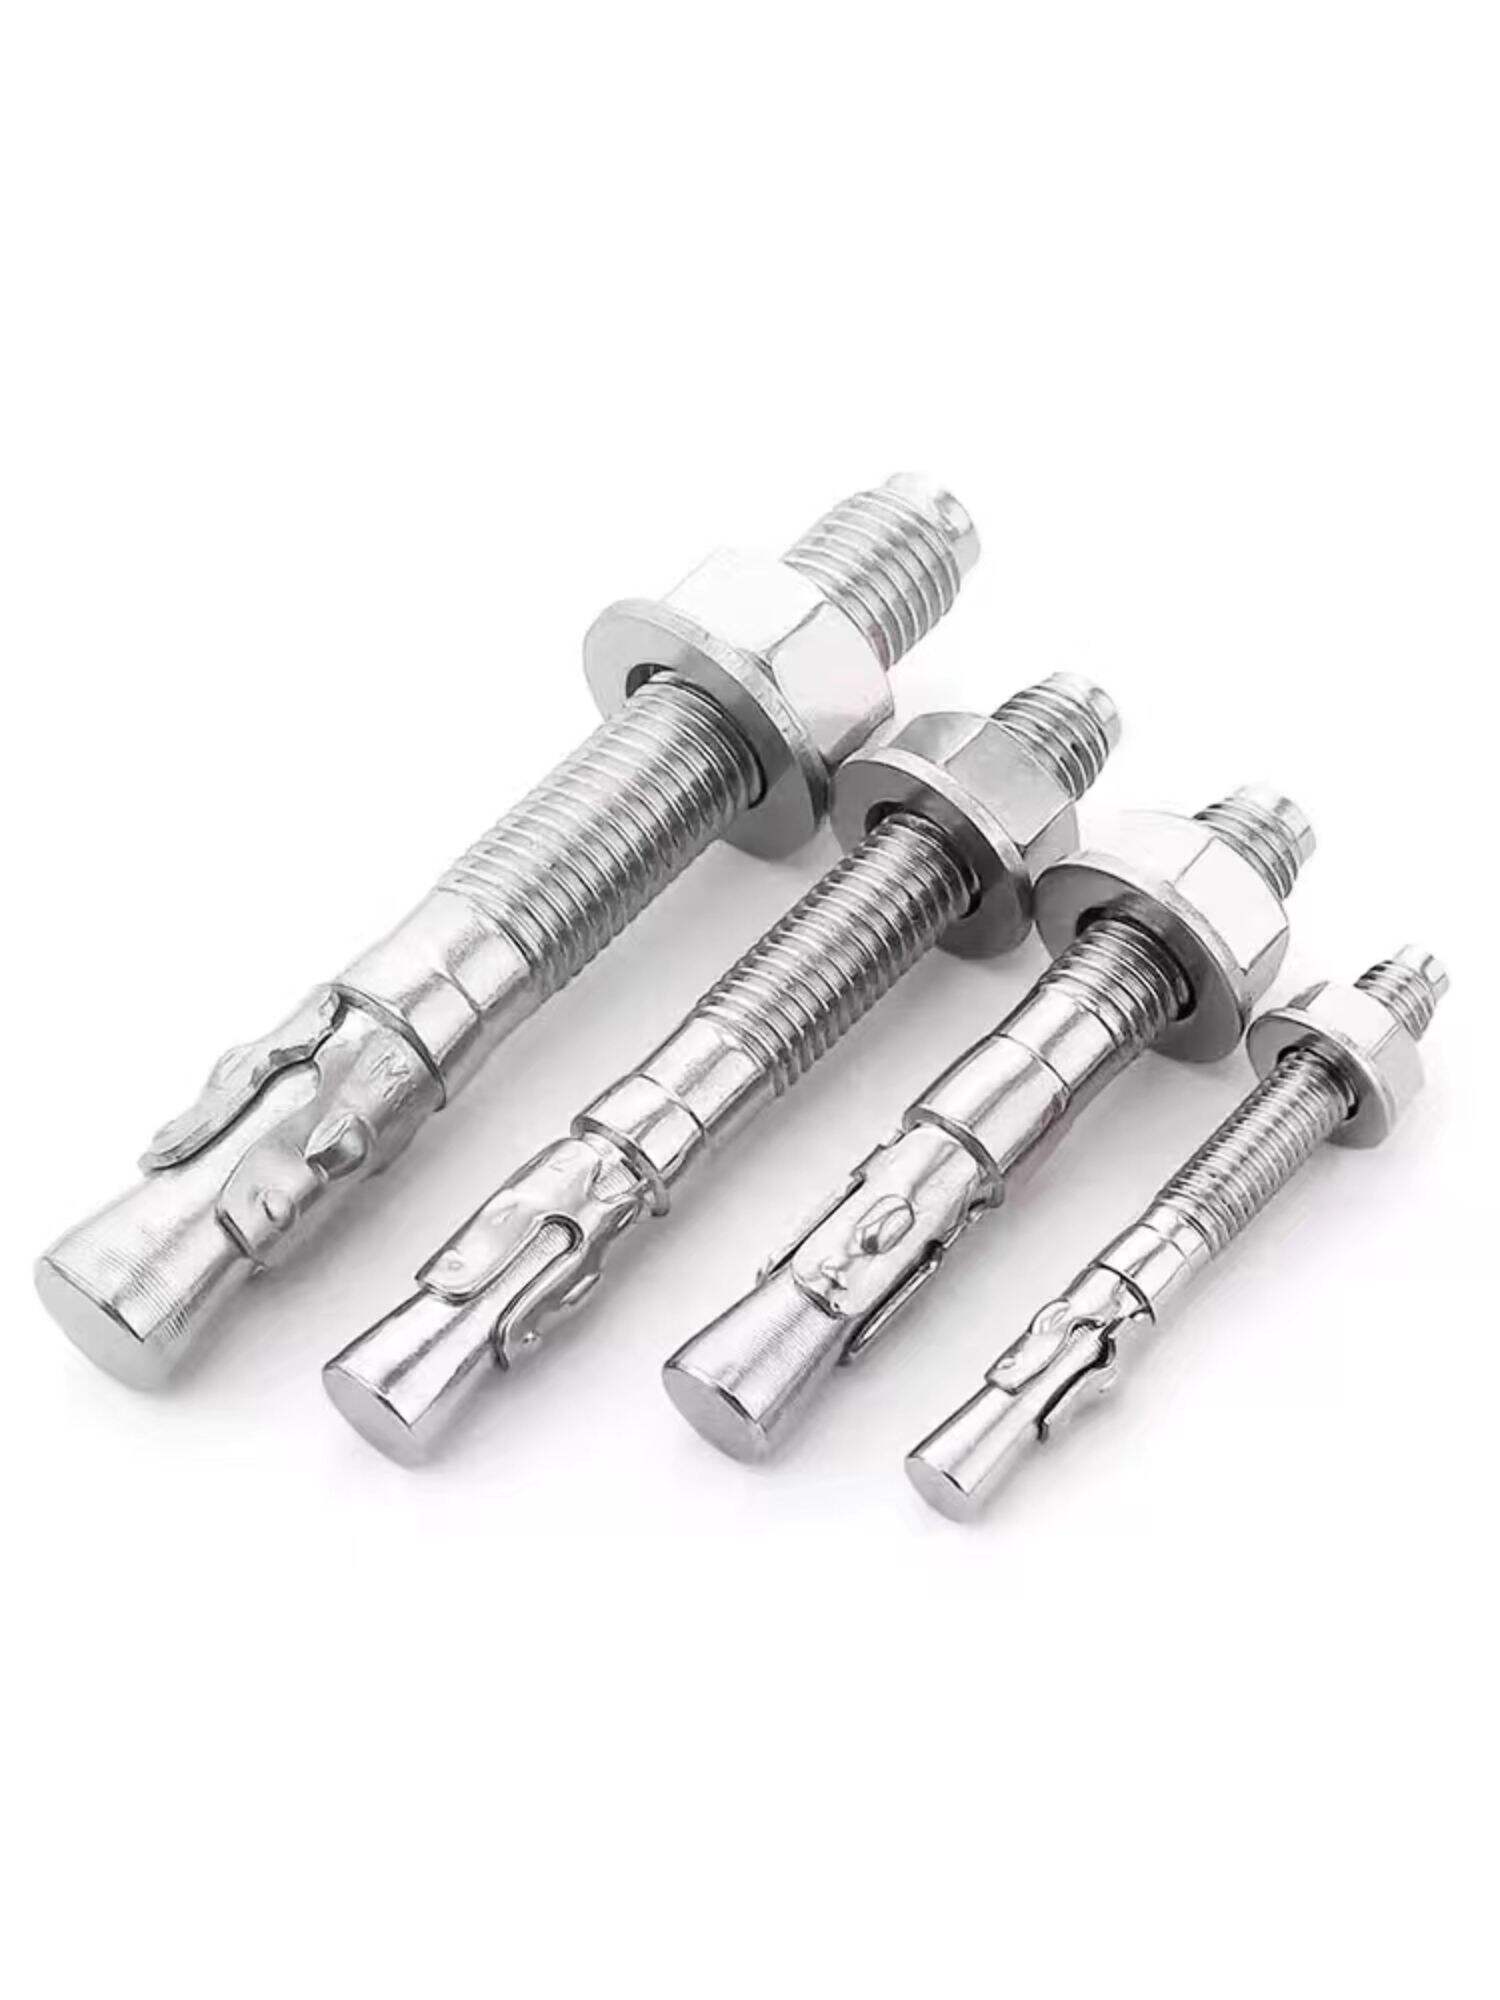 Stainless Steel Wedge Anchor Expansion Bolts